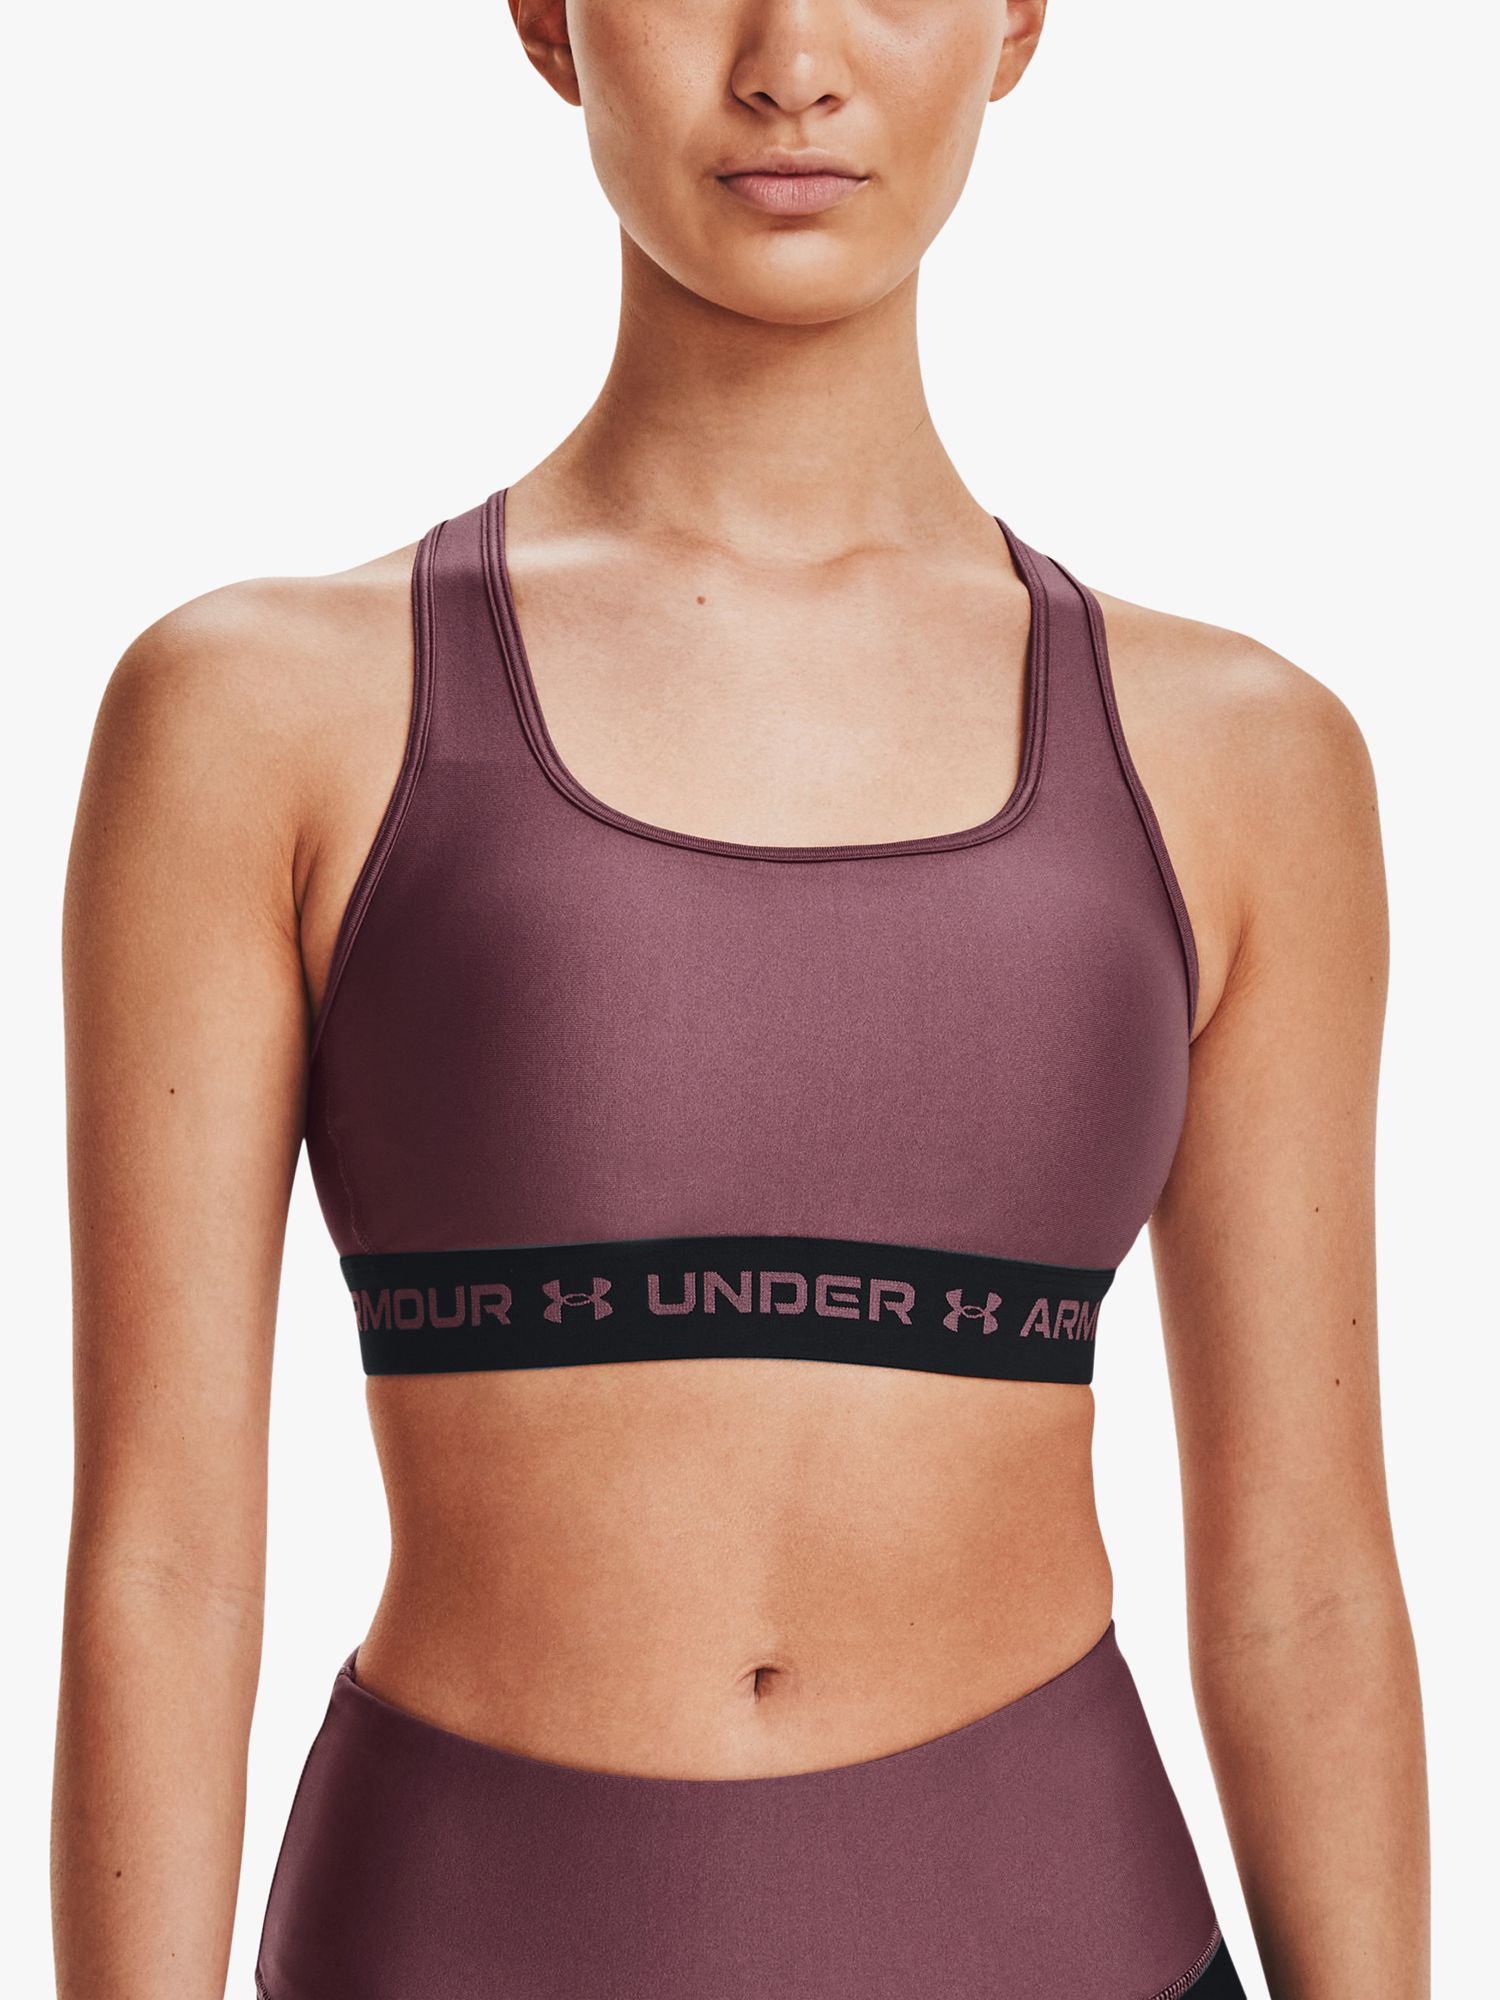 Under Armour Women's Armour Mid Crossback Sports Bra - Gray Large